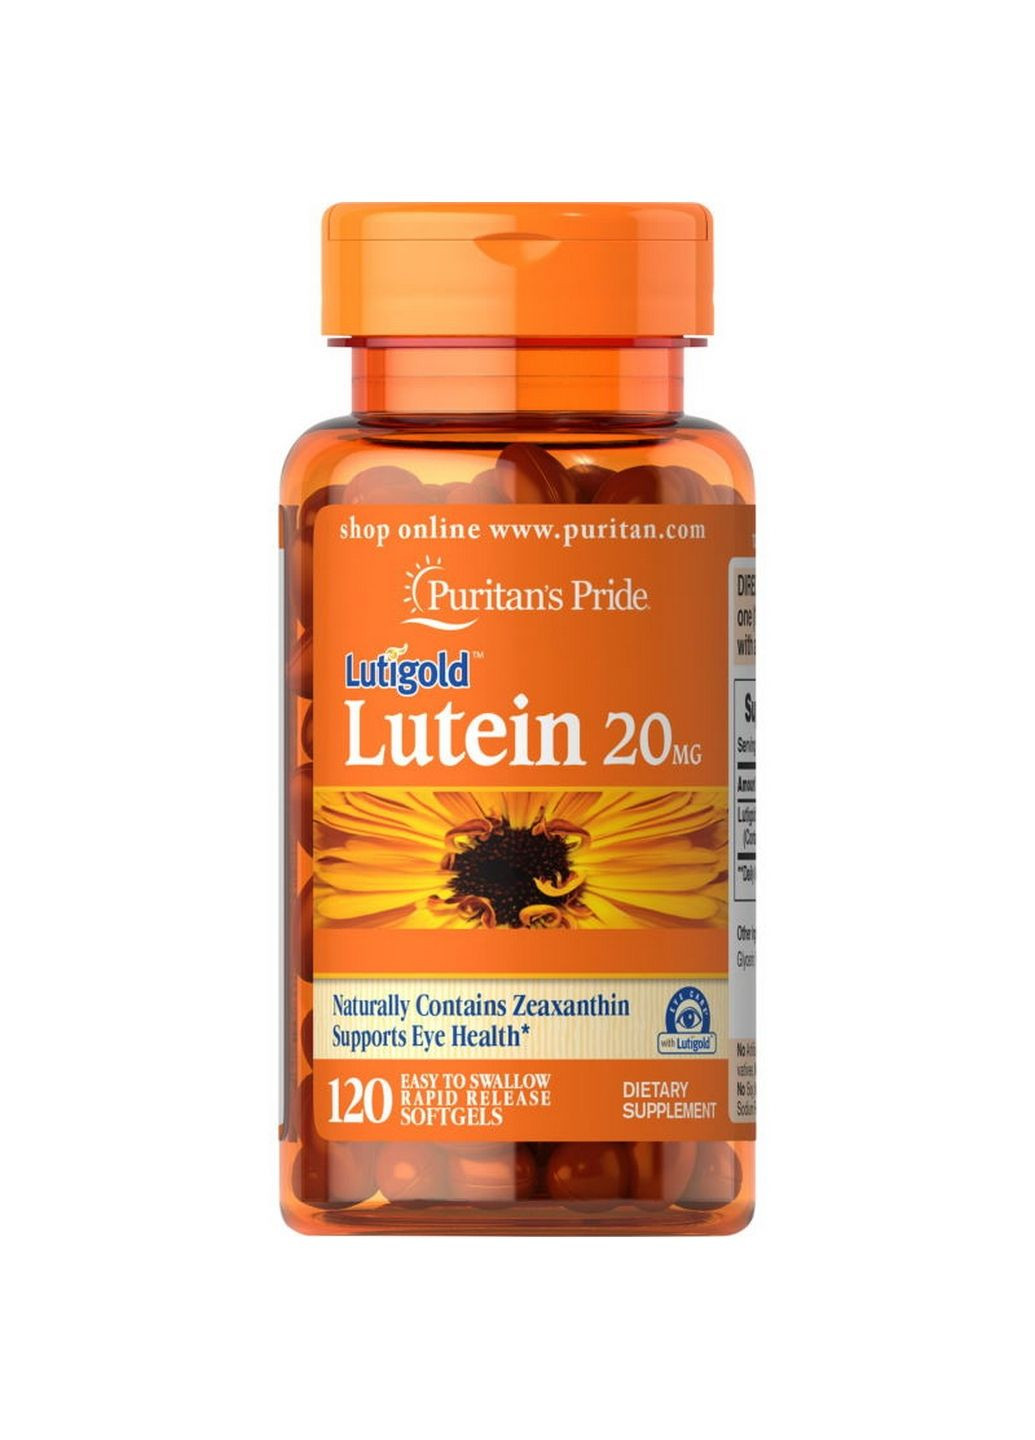 Натуральна добавка Lutein 20 mg with Zeaxanthin, 120 капсул Puritans Pride (293483478)